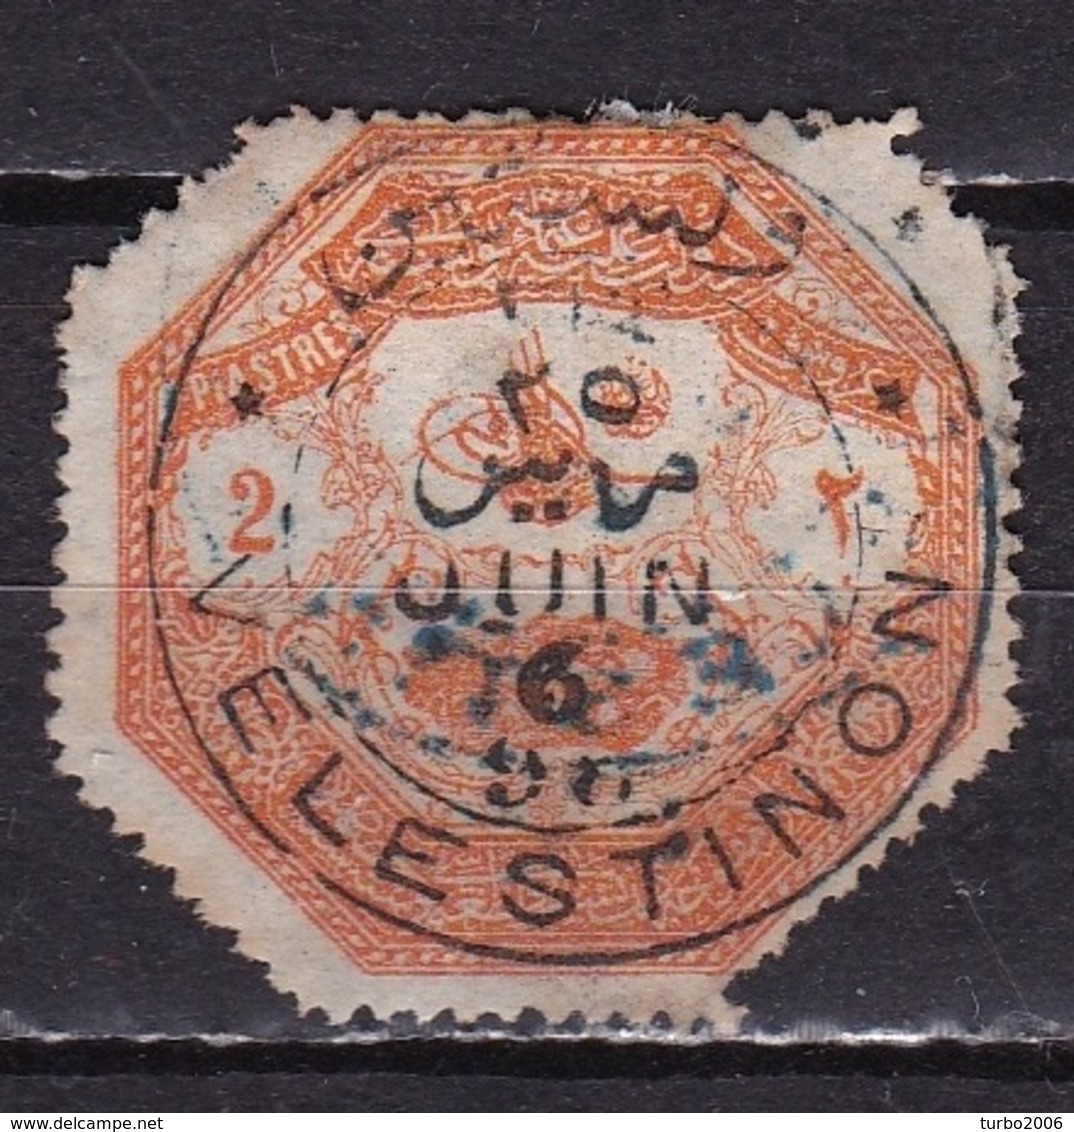 THESSALIA  1898 2 Pi Orange Used VELESTINON By The Turkish Army Of Occupation During The Greek-Turkish War Of 1897 Vl. 4 - Thessalie